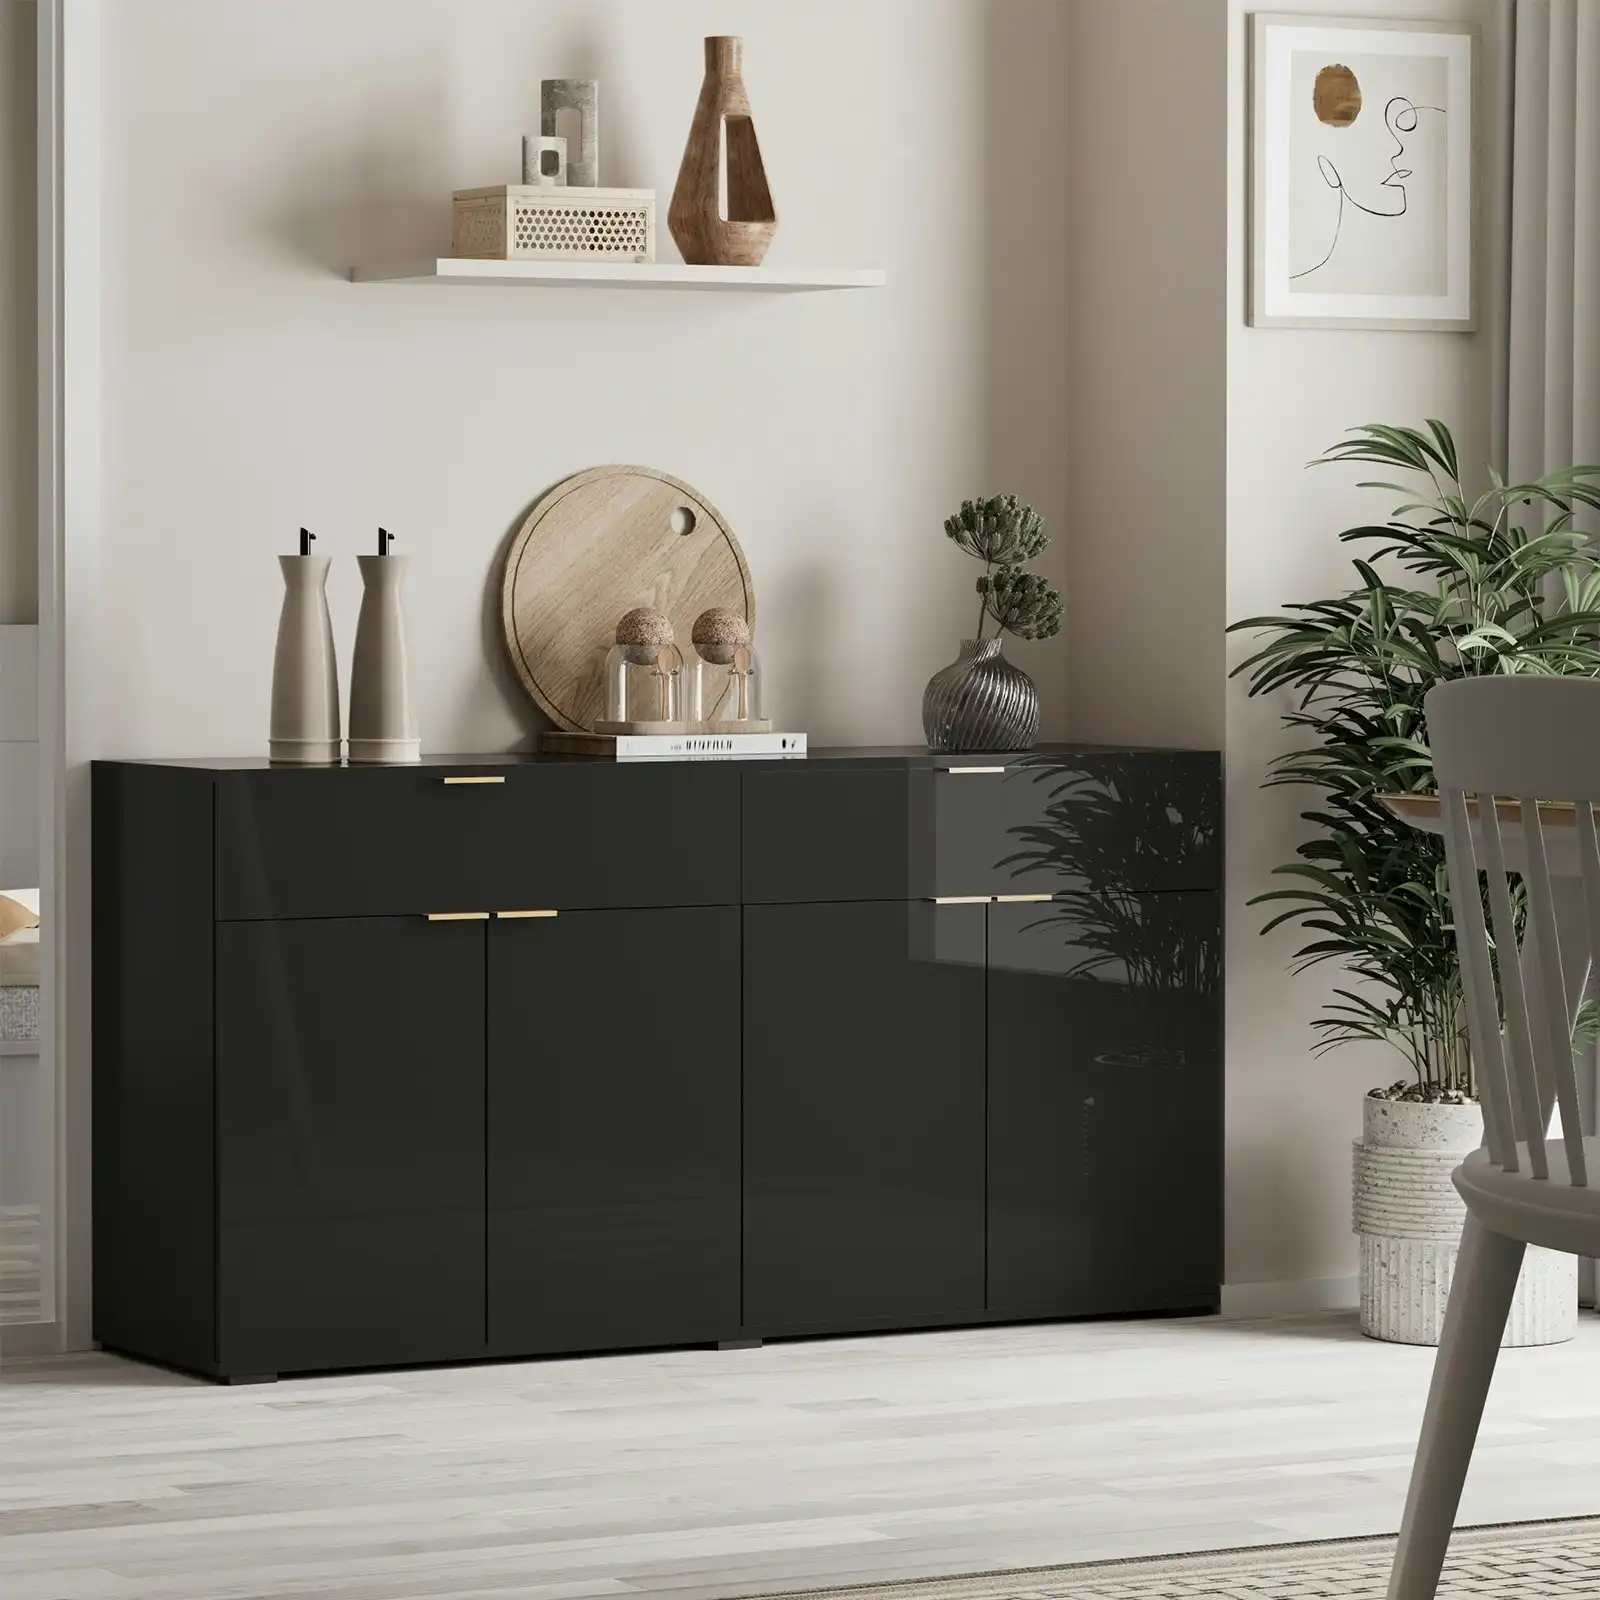 Oikiture Sideboard Buffet Storage Cabinet High Gloss 4 Doors 2 Drawers Black